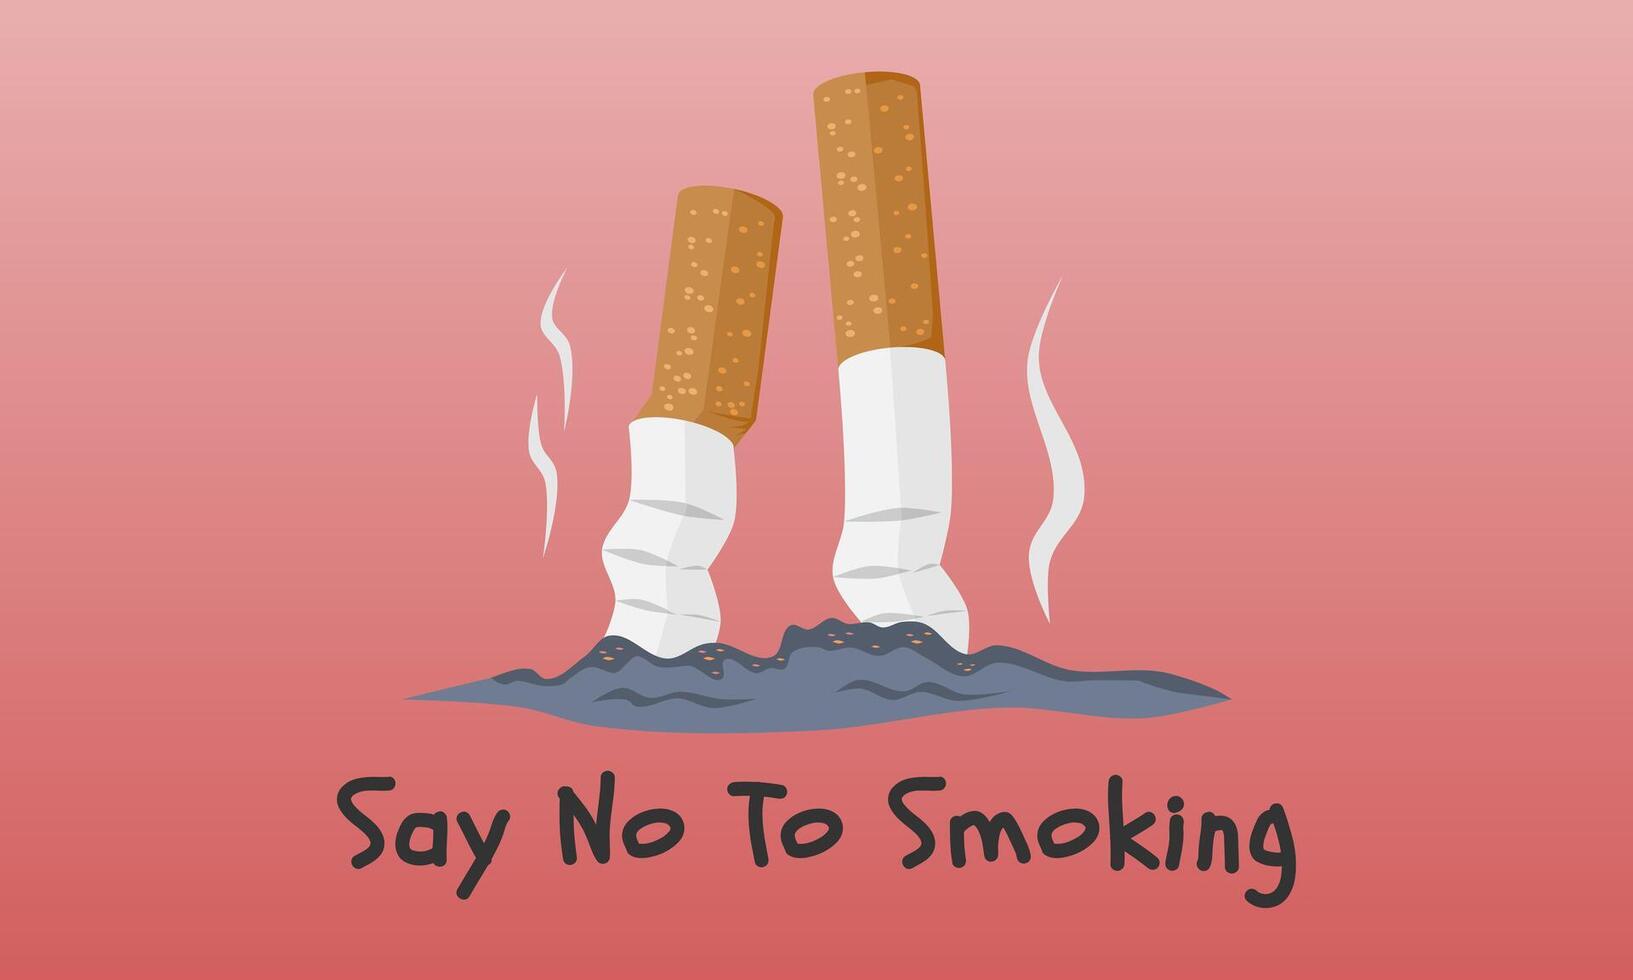 Putting out the cigarette on the ground. Say no to smoking concept. World No Tobacco Day concept design. Vector illustration.